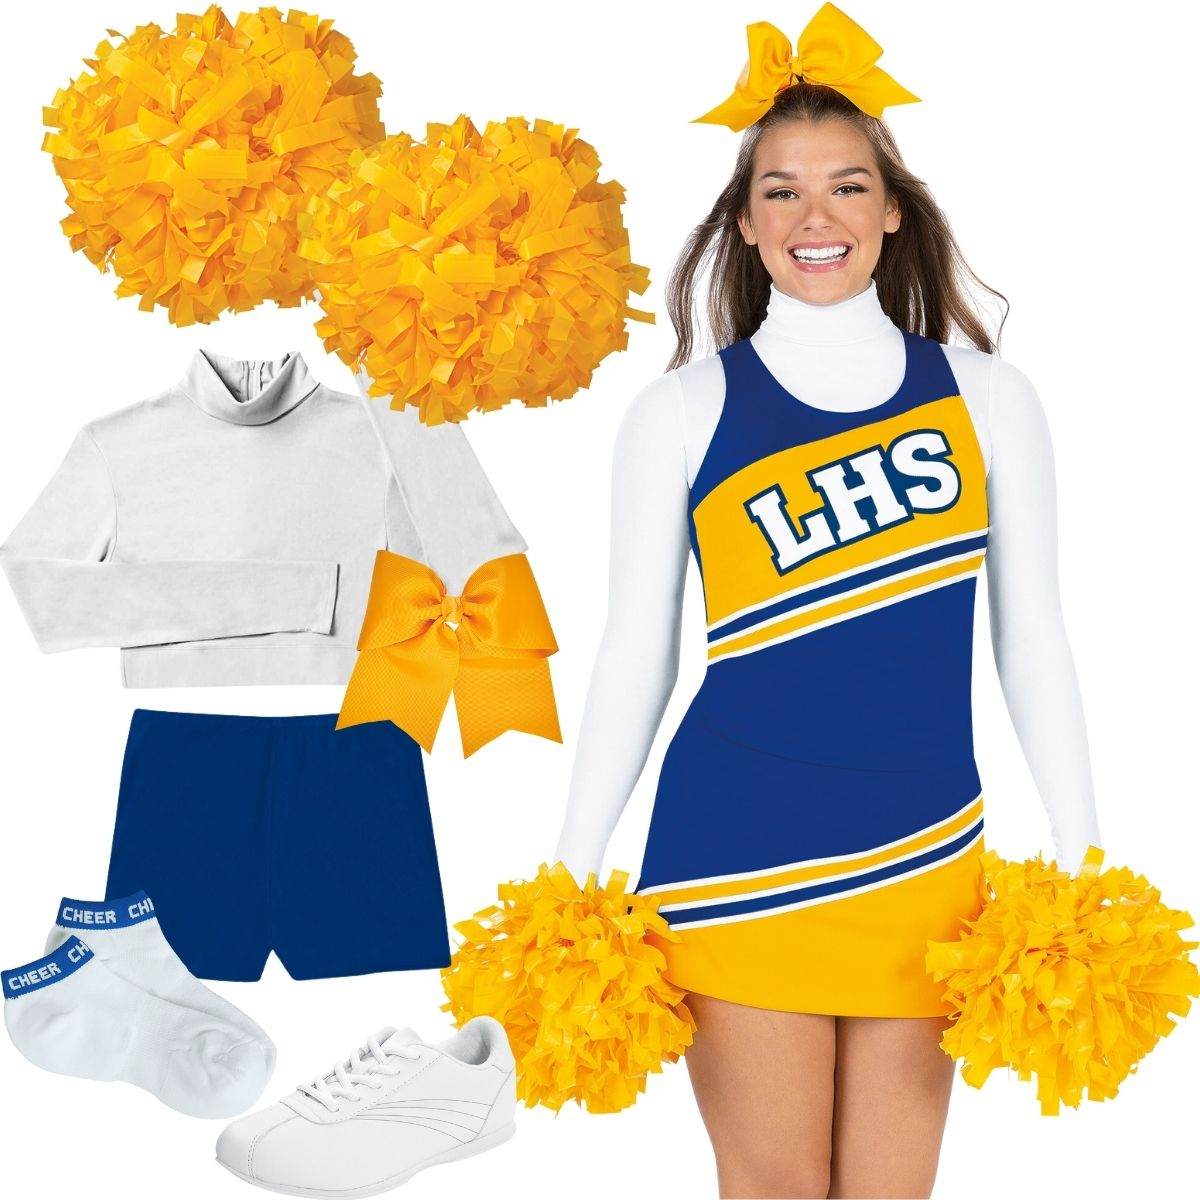 High Quality Cheerleading Uniforms, Cheer Uniform  Packages, Cheer Shoes, Cheerleader Accessories, Cheer Bags, Poms, Campwear,  Cheerleader Apparel, Dance Apparel, Face Masks & more.